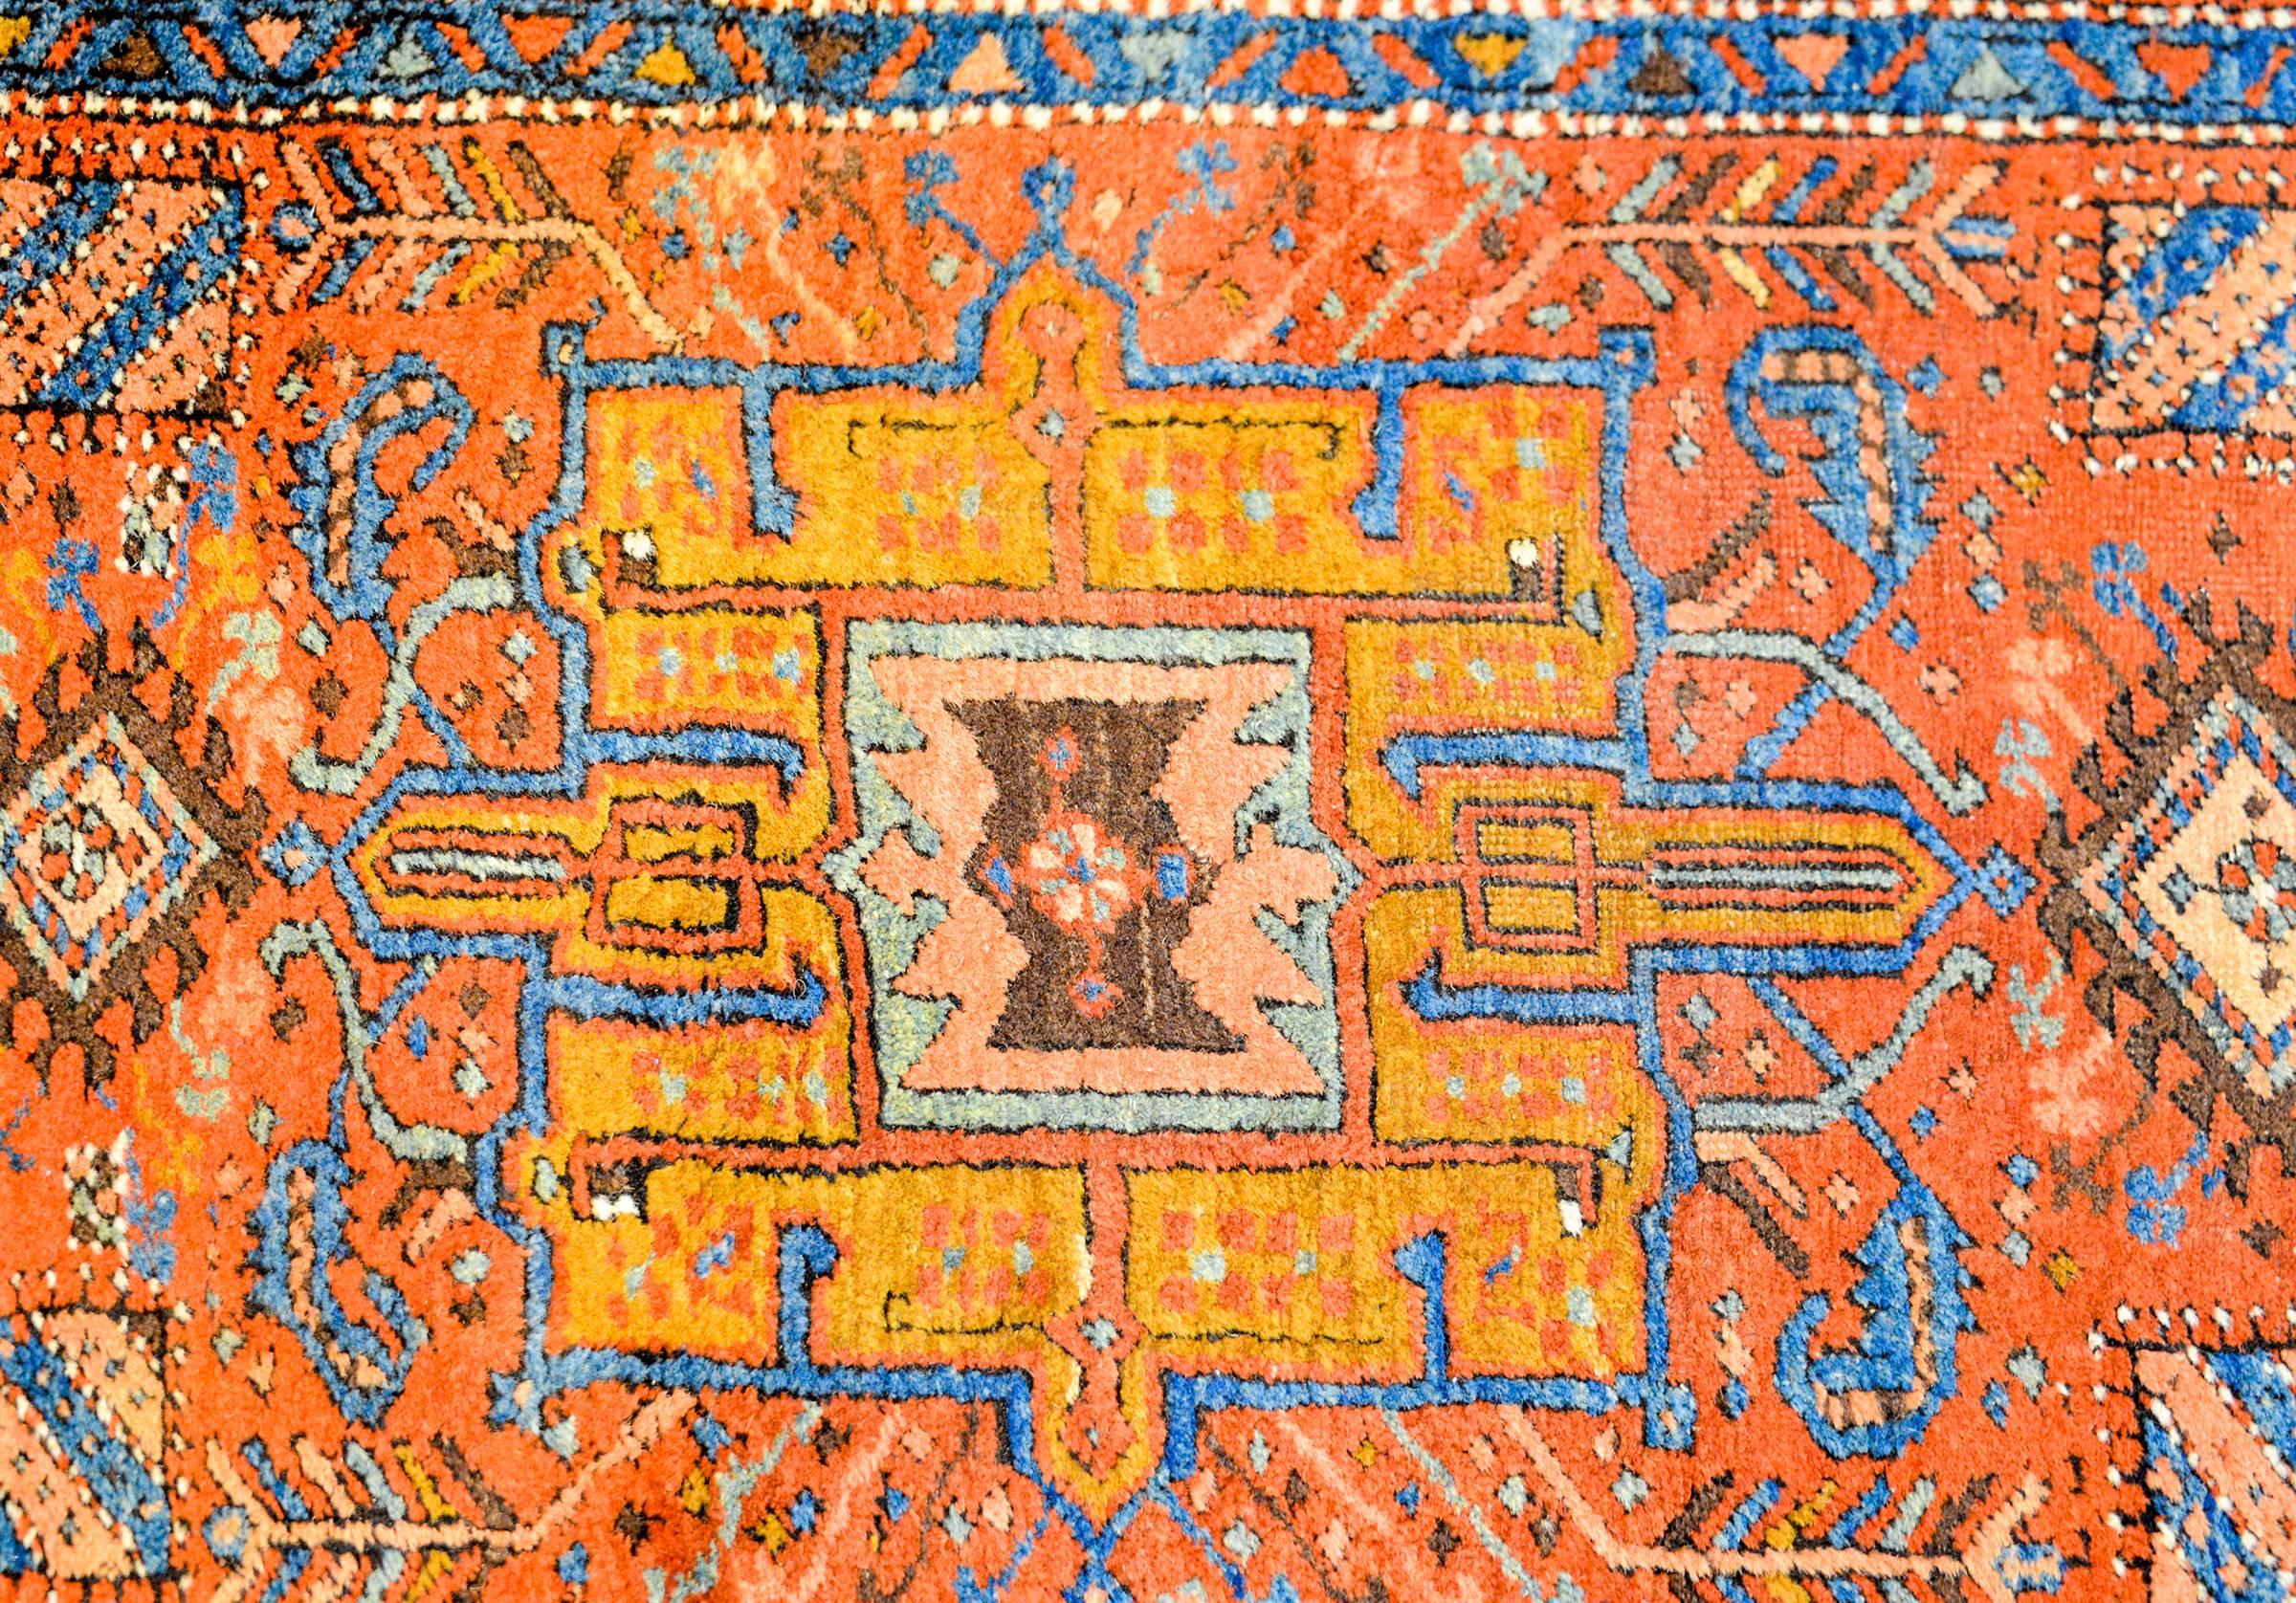 A beautiful and brilliant Early 20th century Persian Heriz runner with multiple geometric and floral medallions woven in rich light and dark indigo, gold, green, and white vegetable dyed wool, on a bold orange background. The border is wide, with a